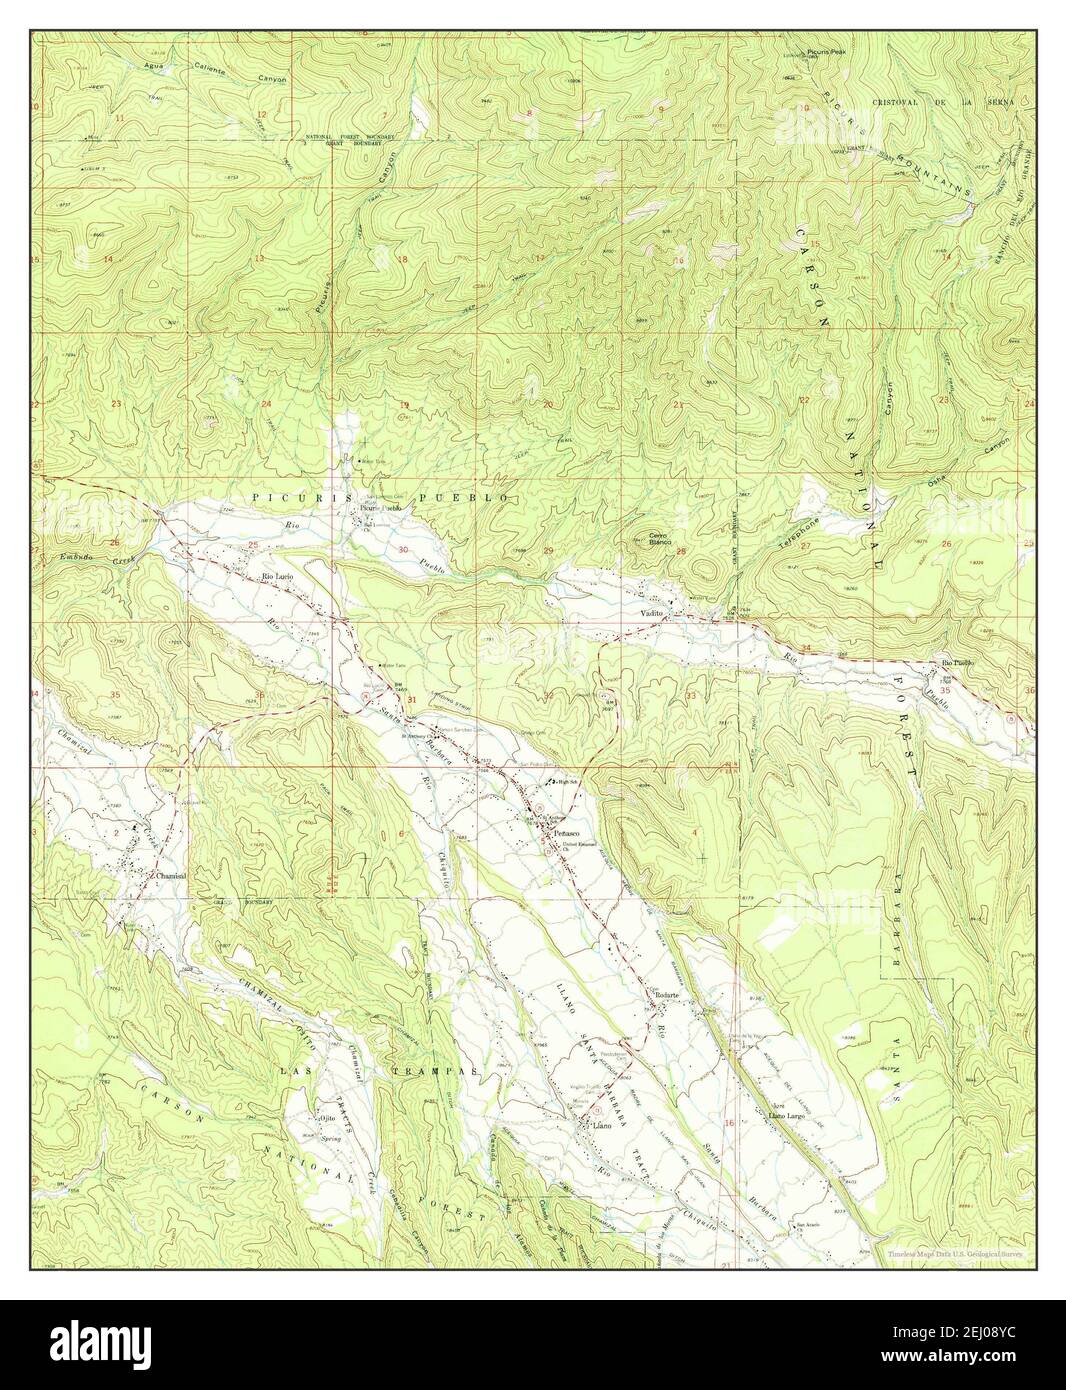 Penasco, New Mexico, map 1964, 1:24000, United States of America by Timeless Maps, data U.S. Geological Survey Stock Photo